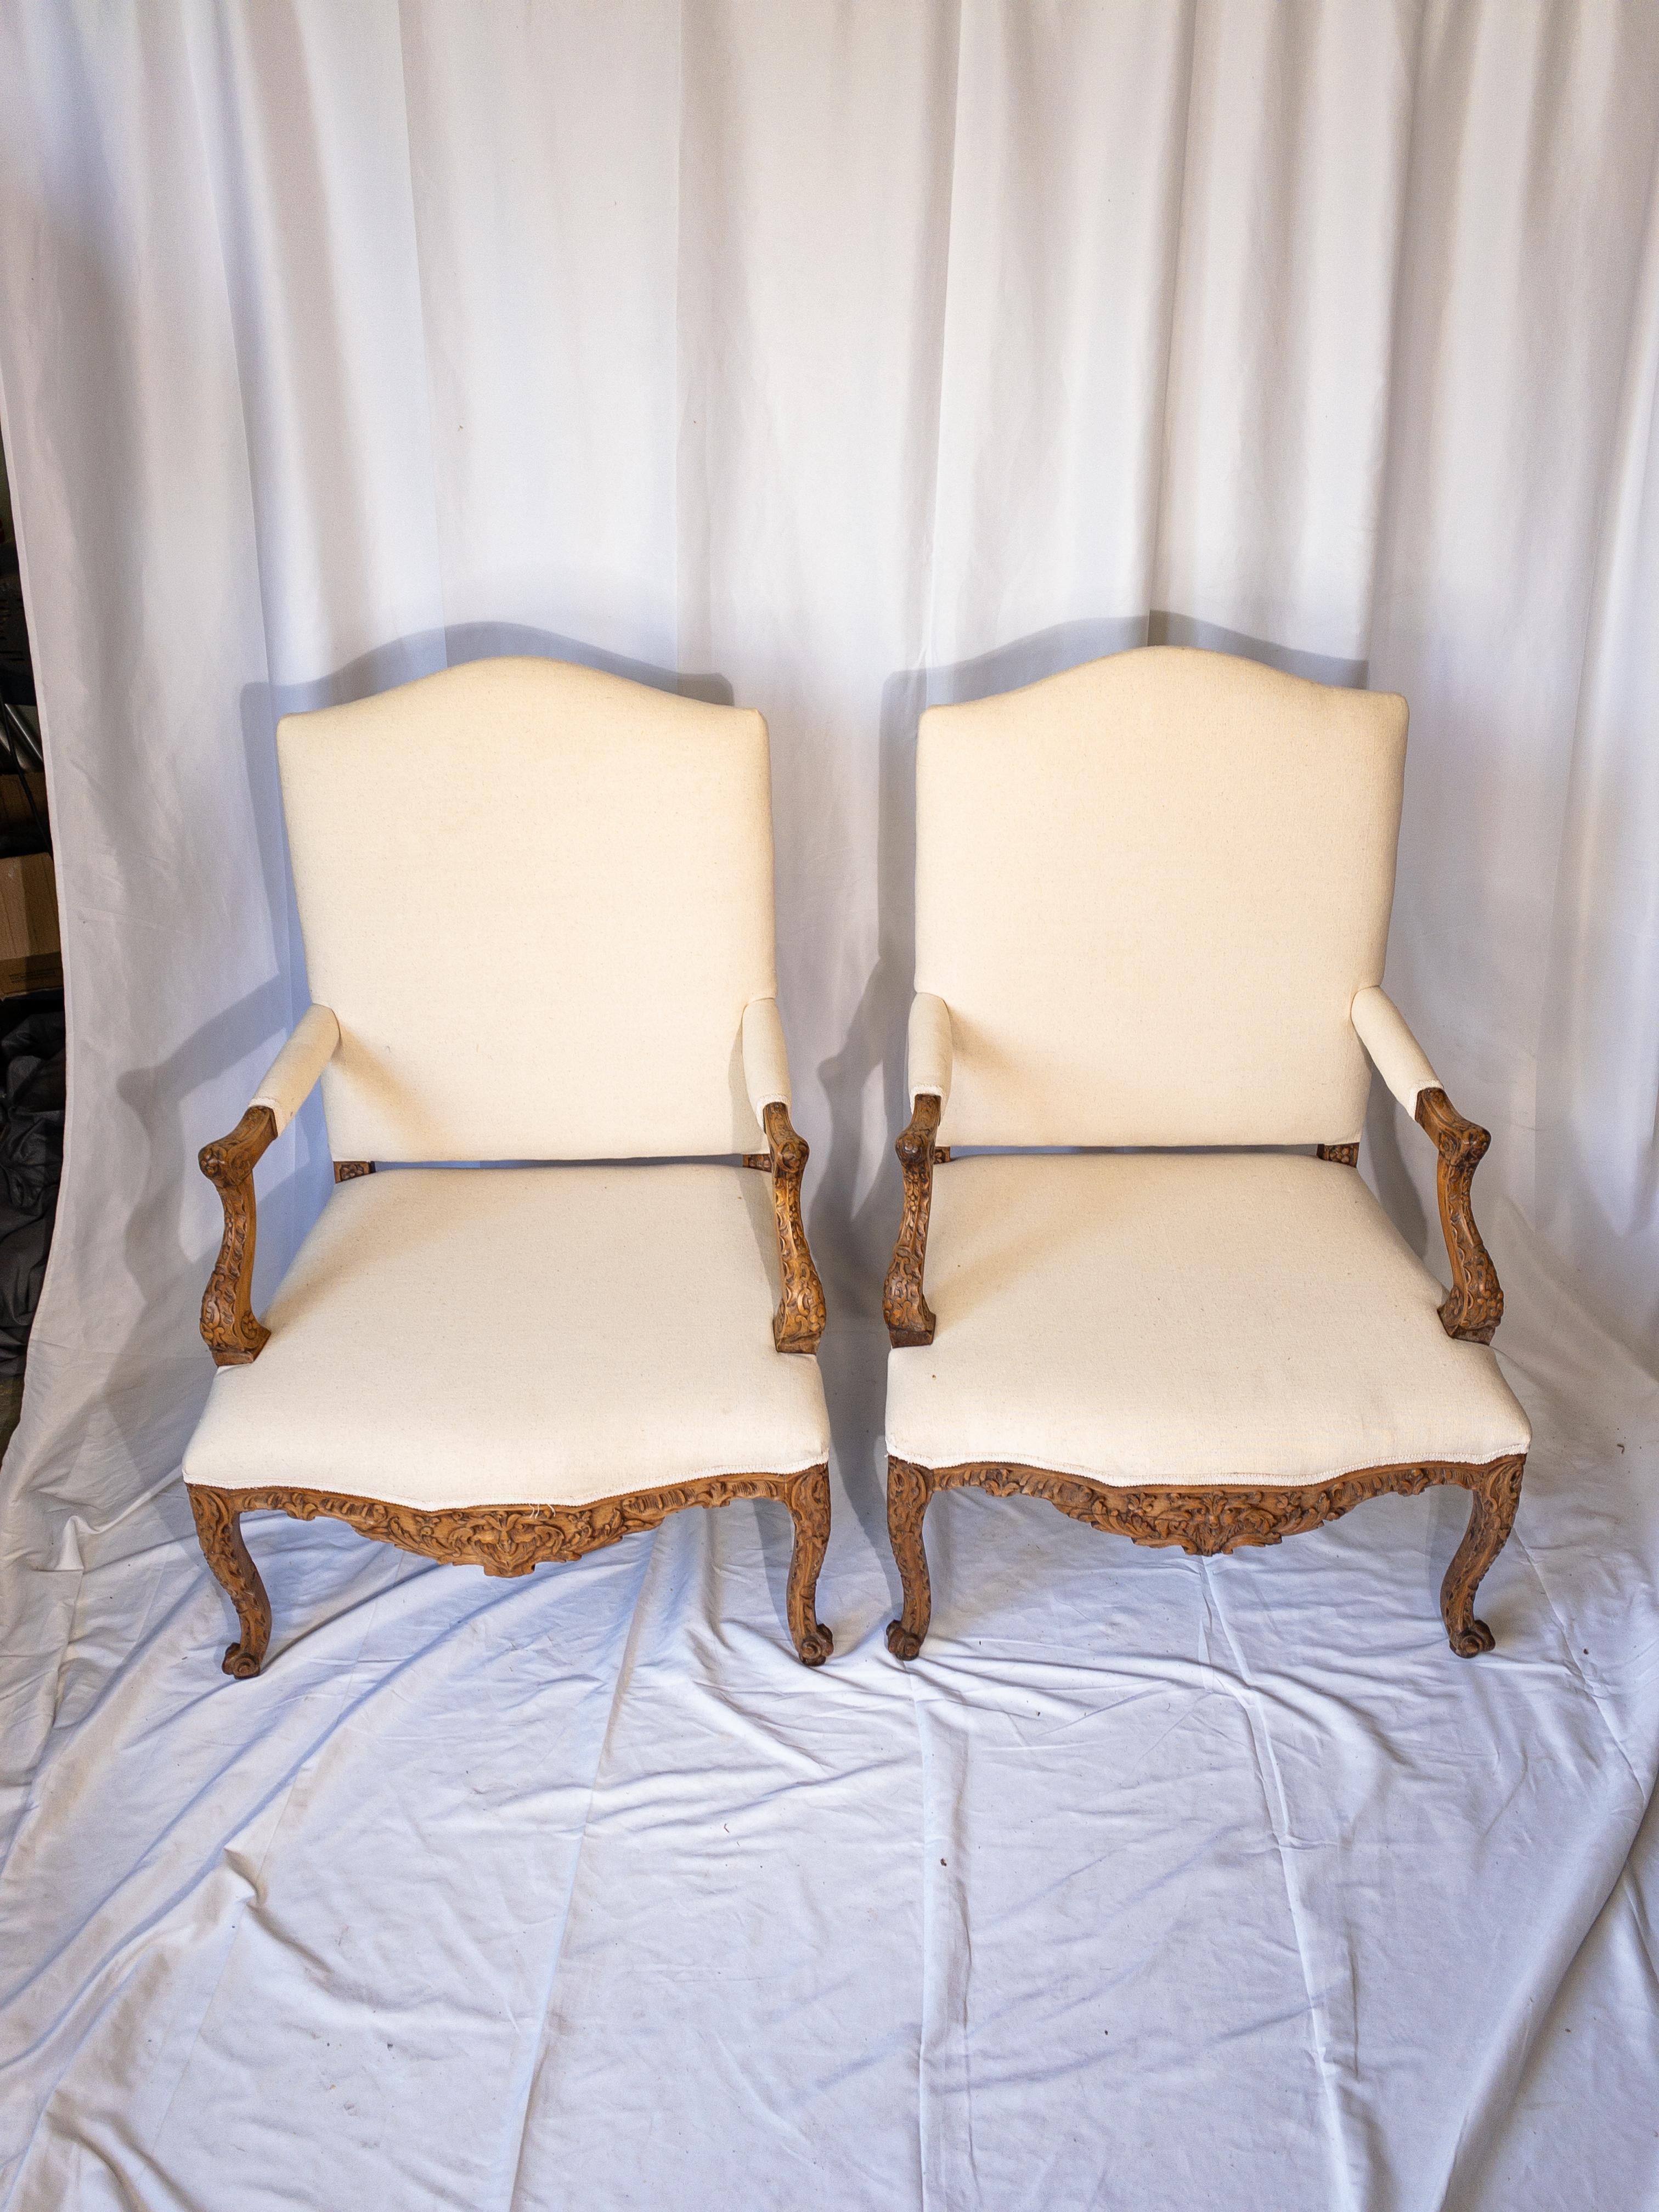 Pair of 19th Century French Louis XV Style Carved Wooden Arm Chairs In Good Condition For Sale In Houston, TX